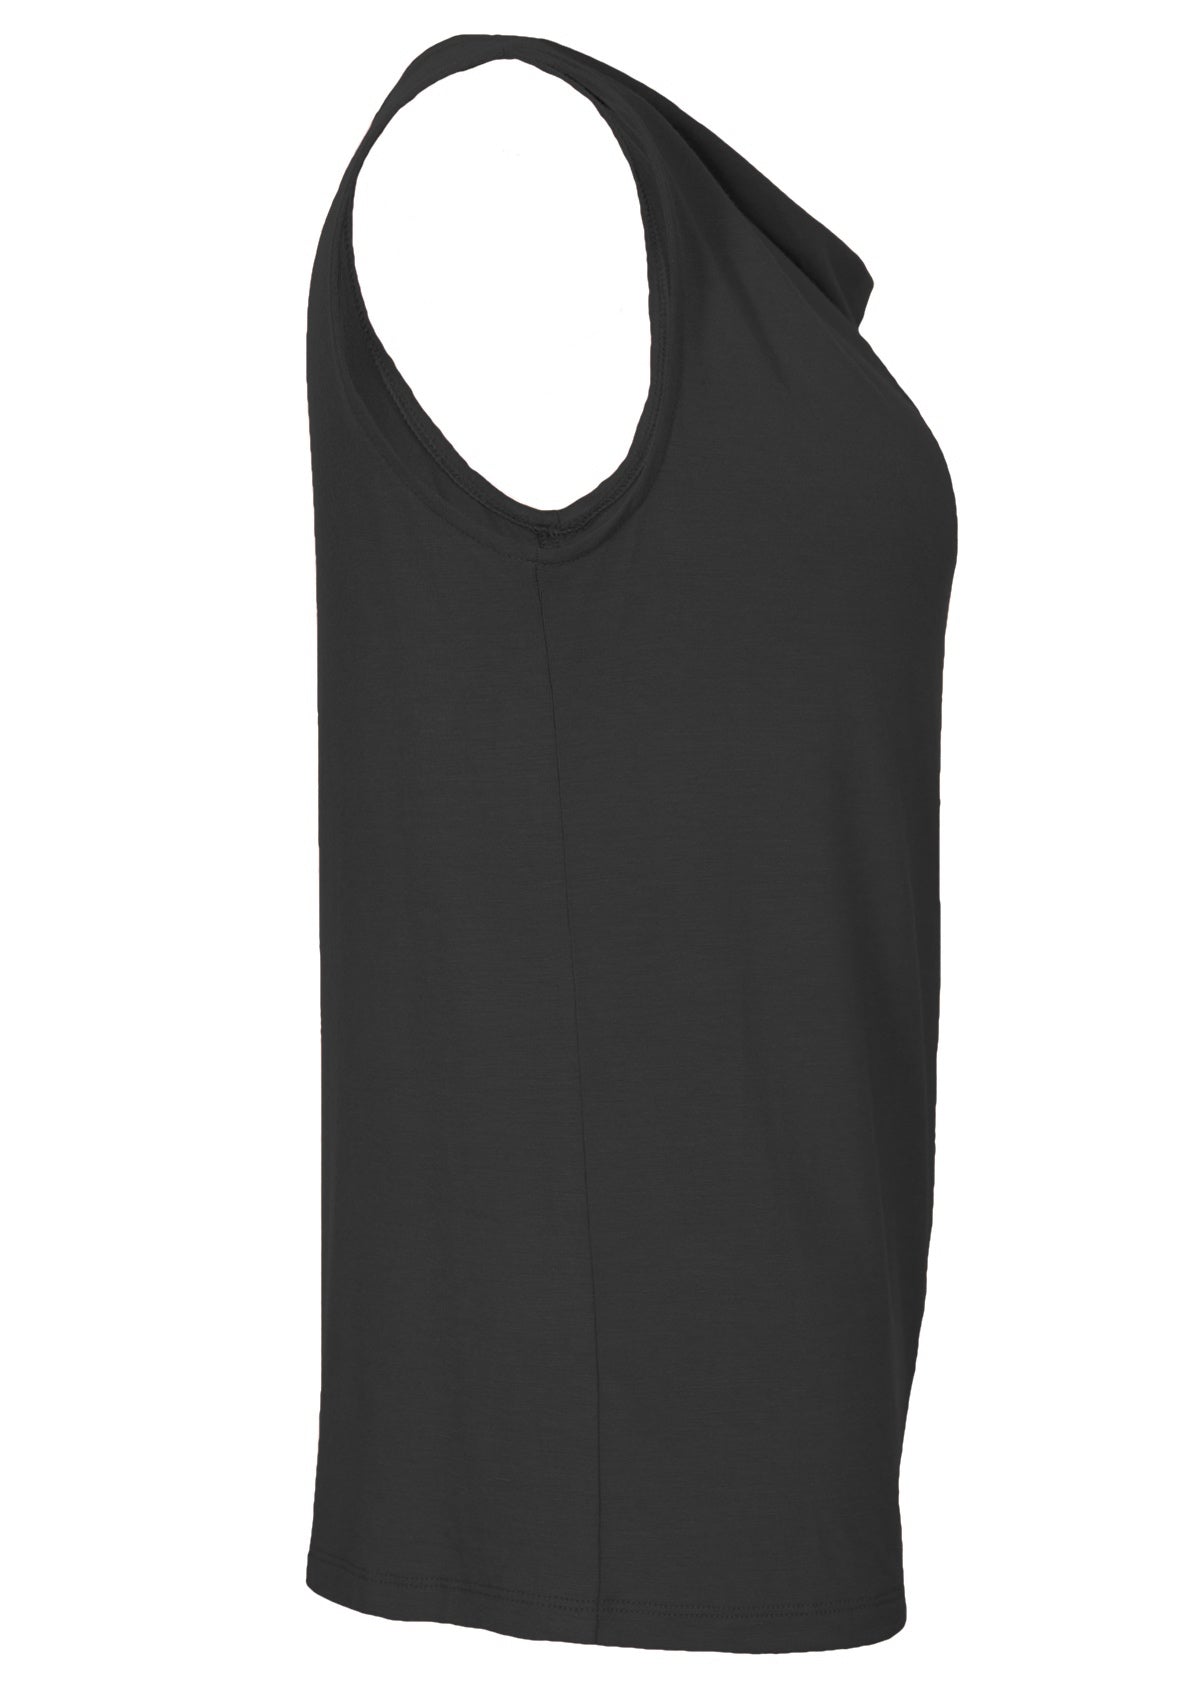 side view fitted women's soft jersey top black